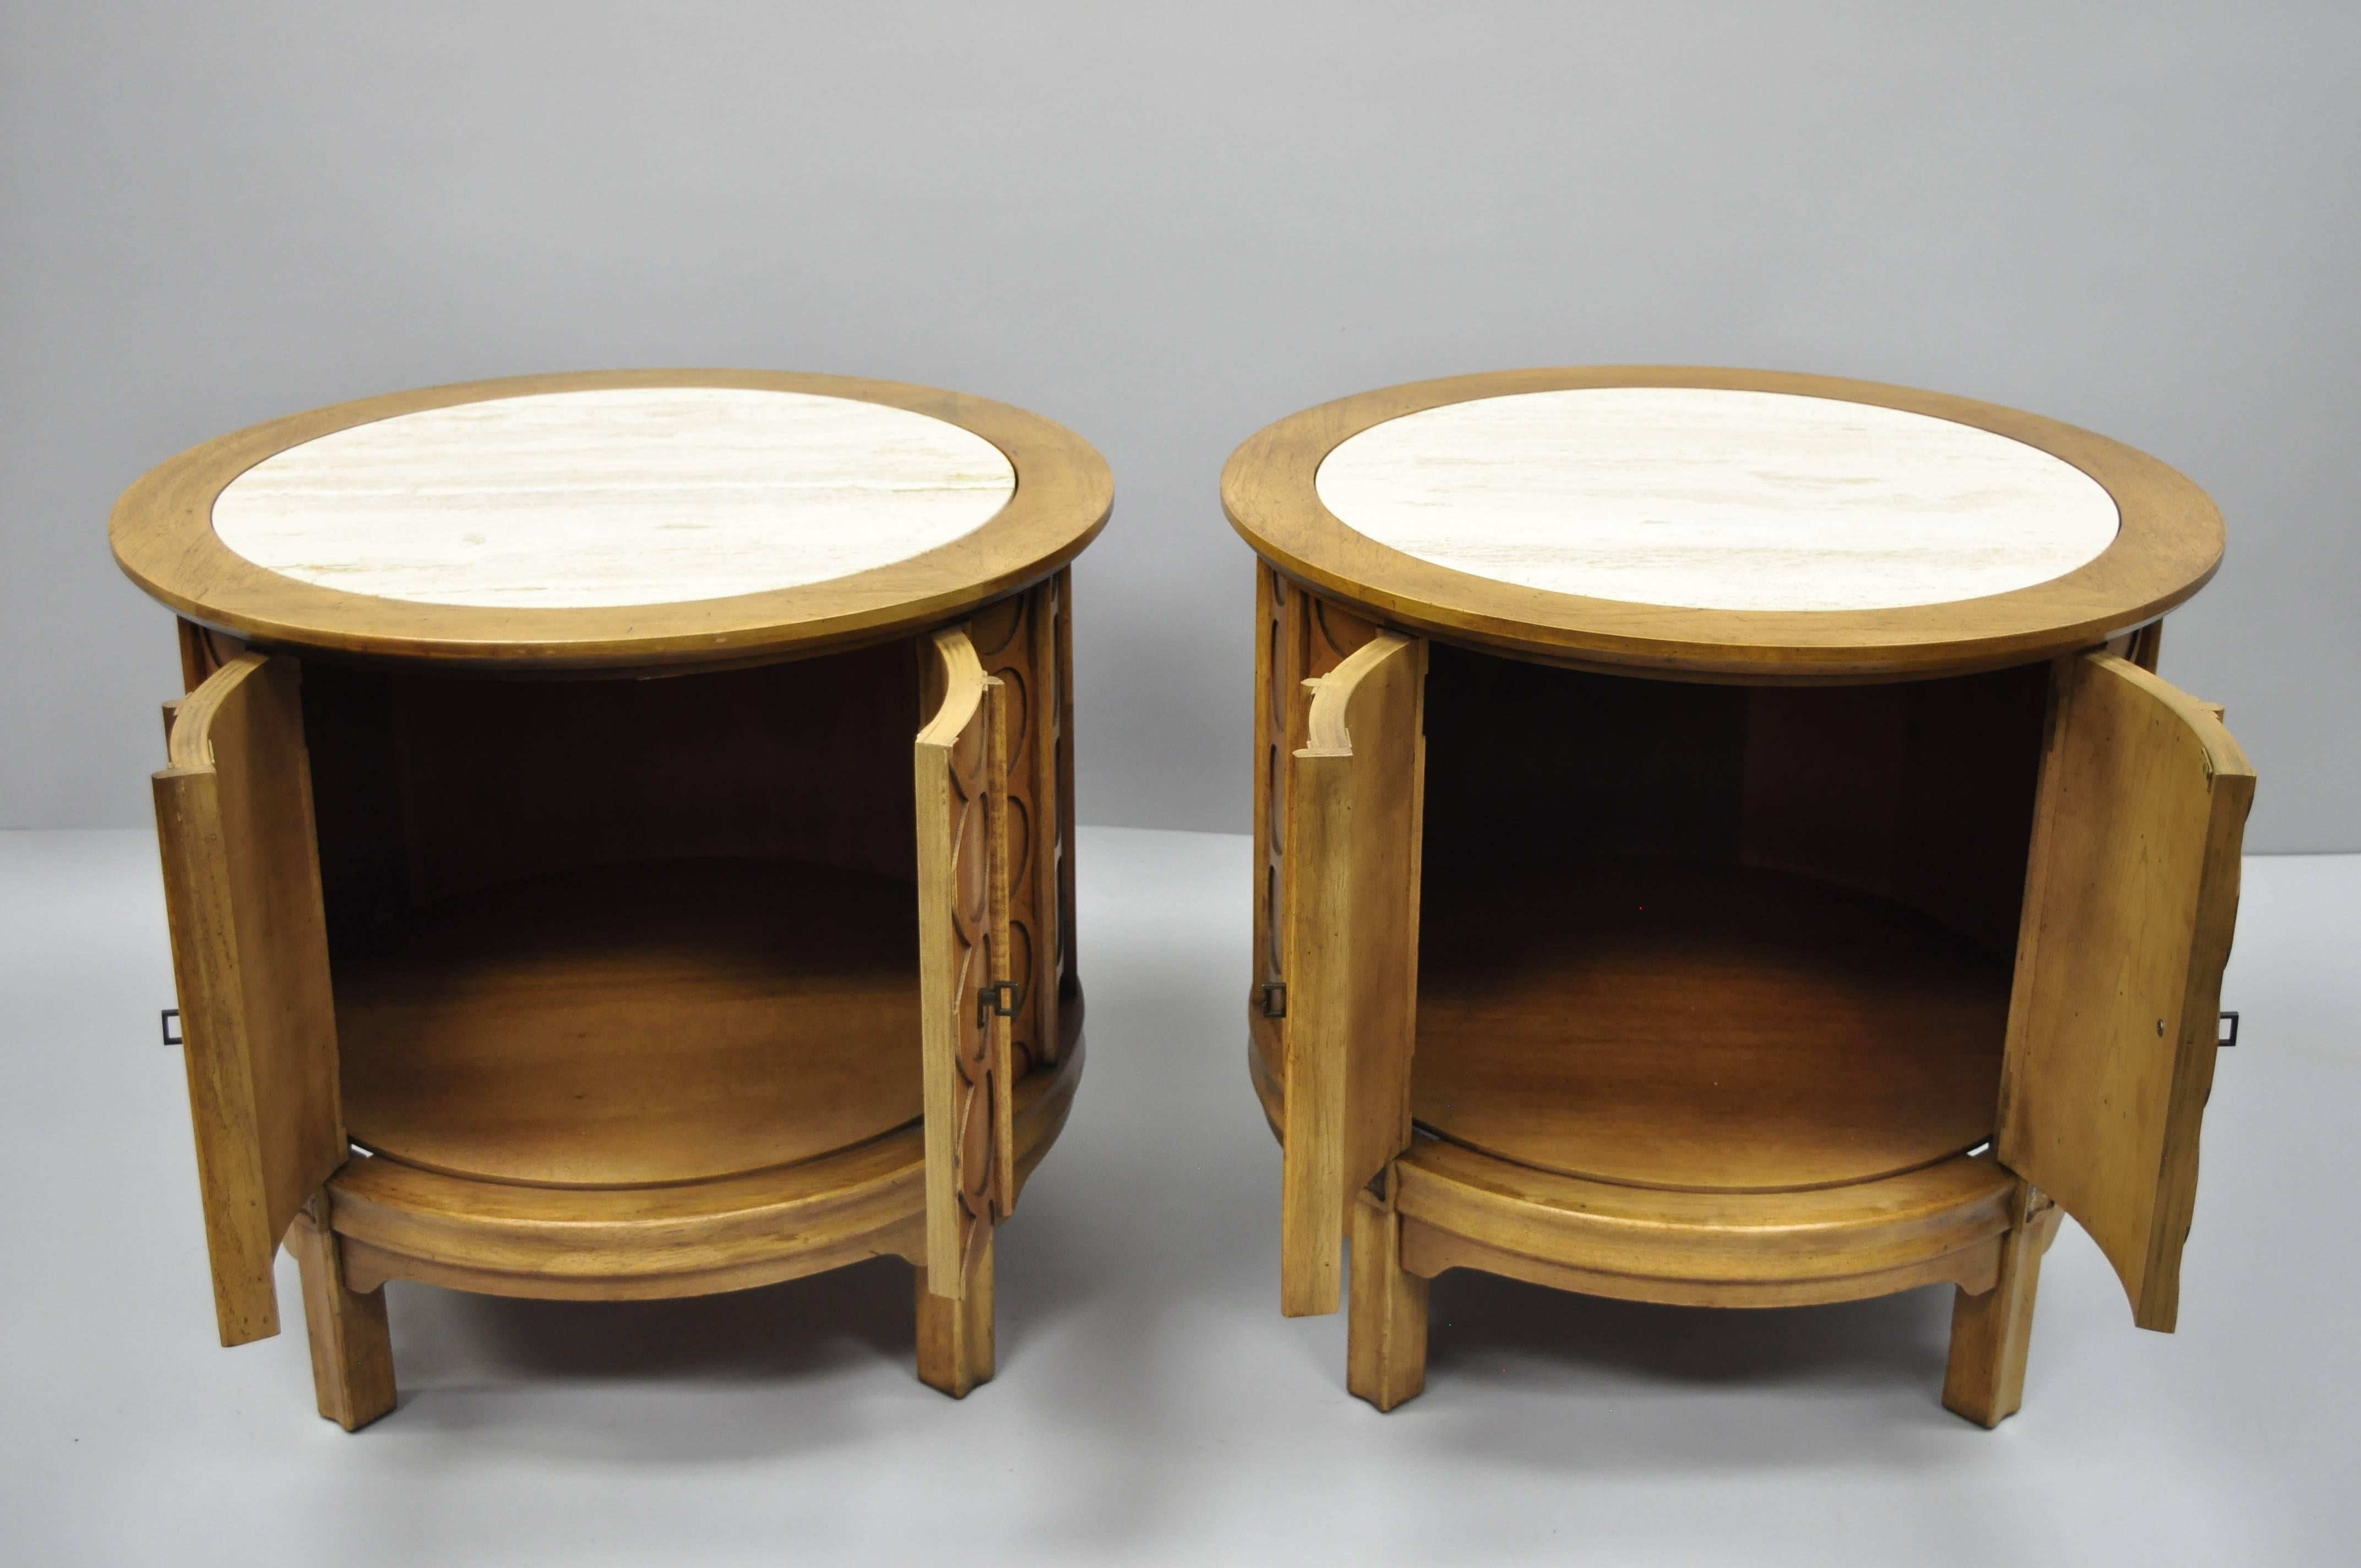 American Pair of Thomasville Travertine Top Mid-Century Modern Round Commode End Tables